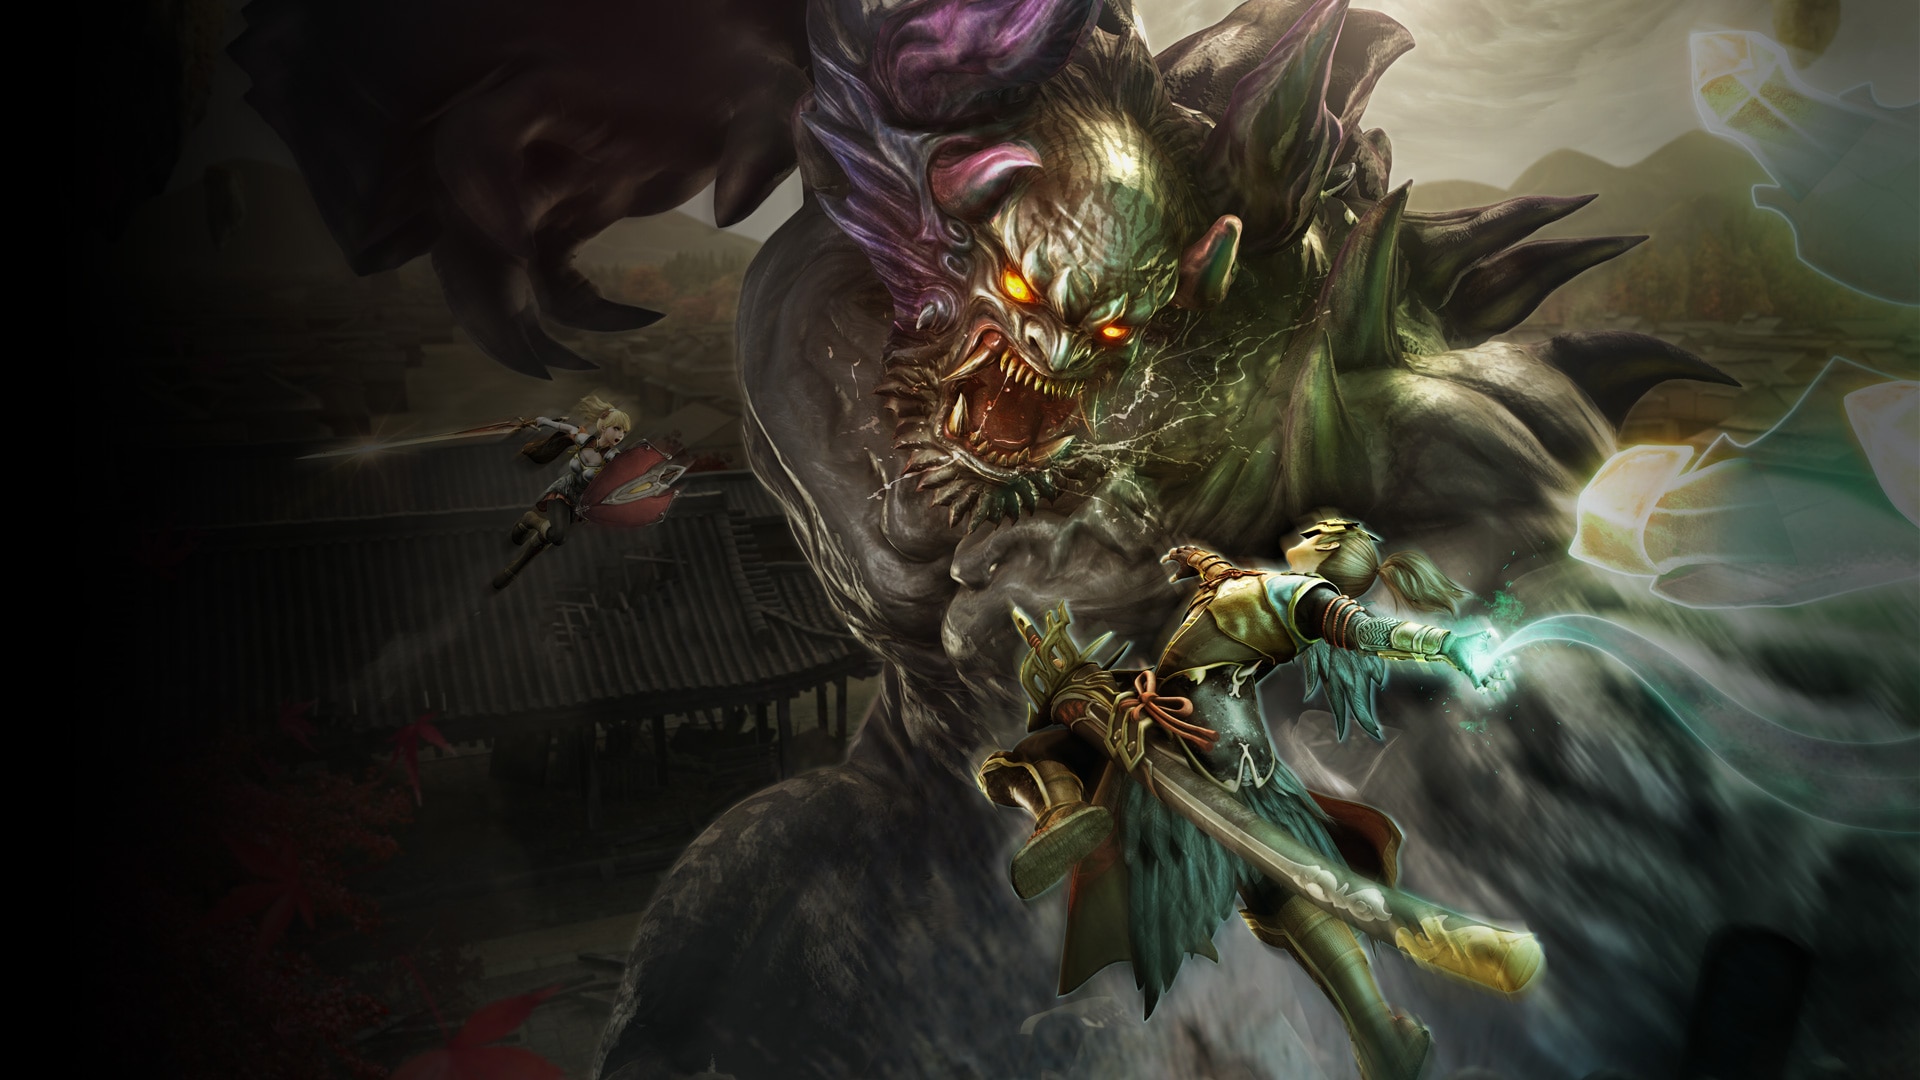 Video Game Toukiden 2 HD Wallpaper | Background Image